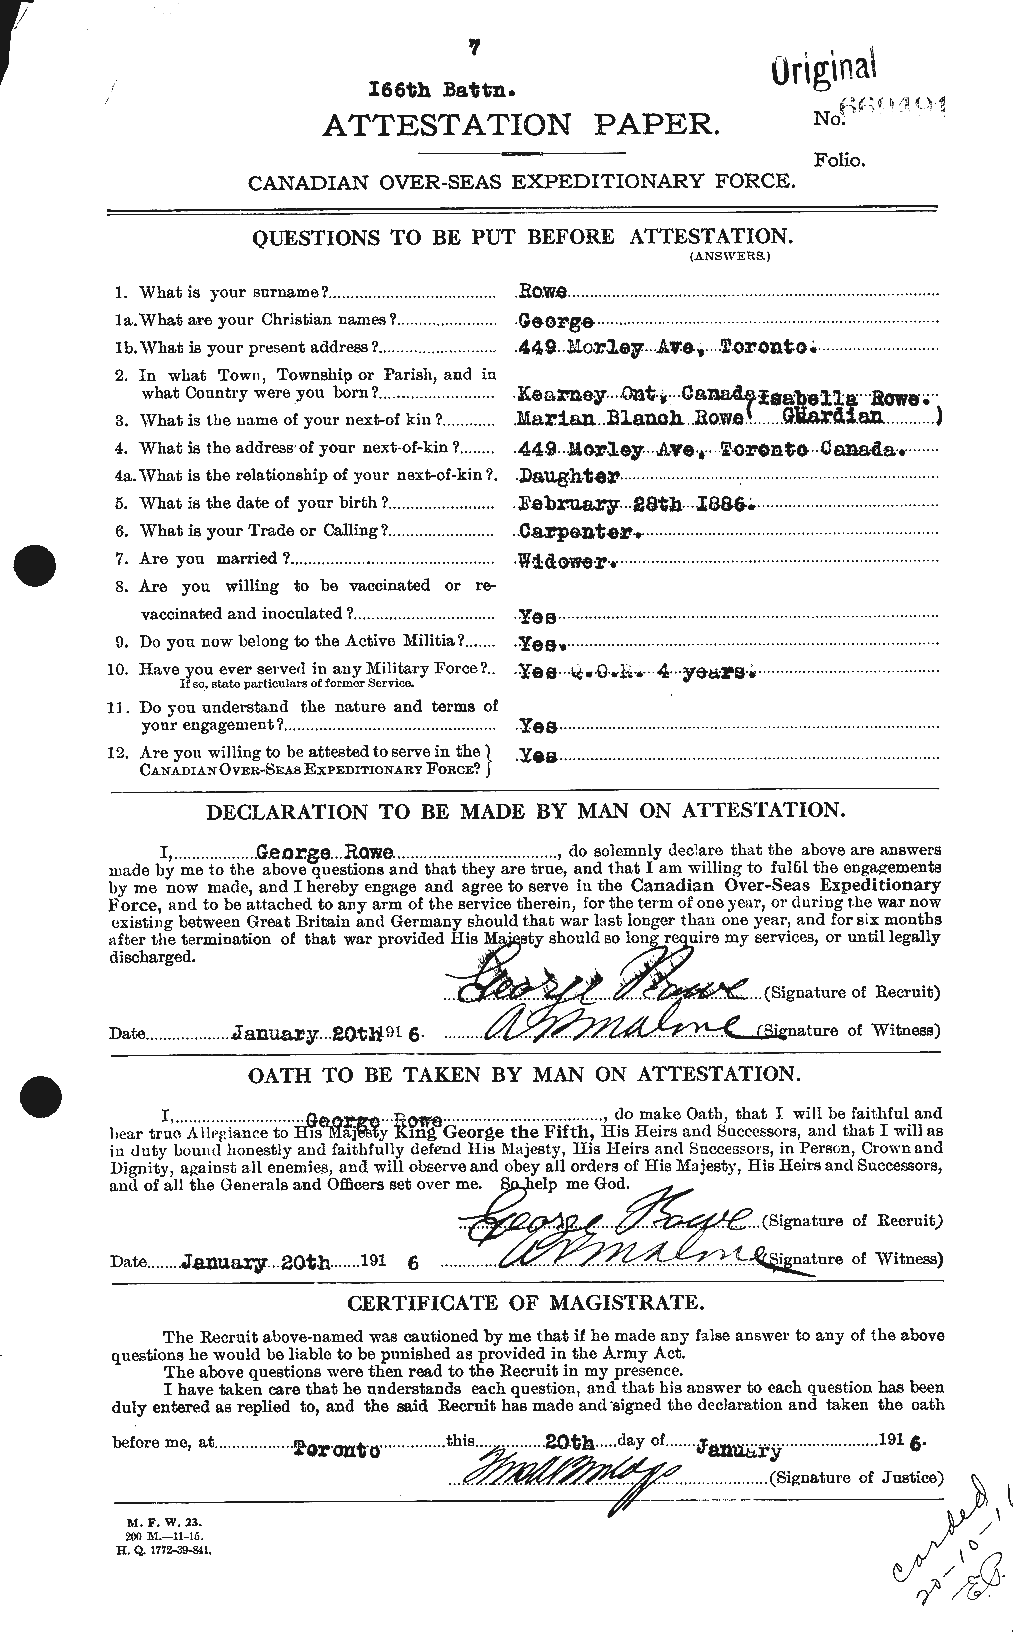 Personnel Records of the First World War - CEF 615870a